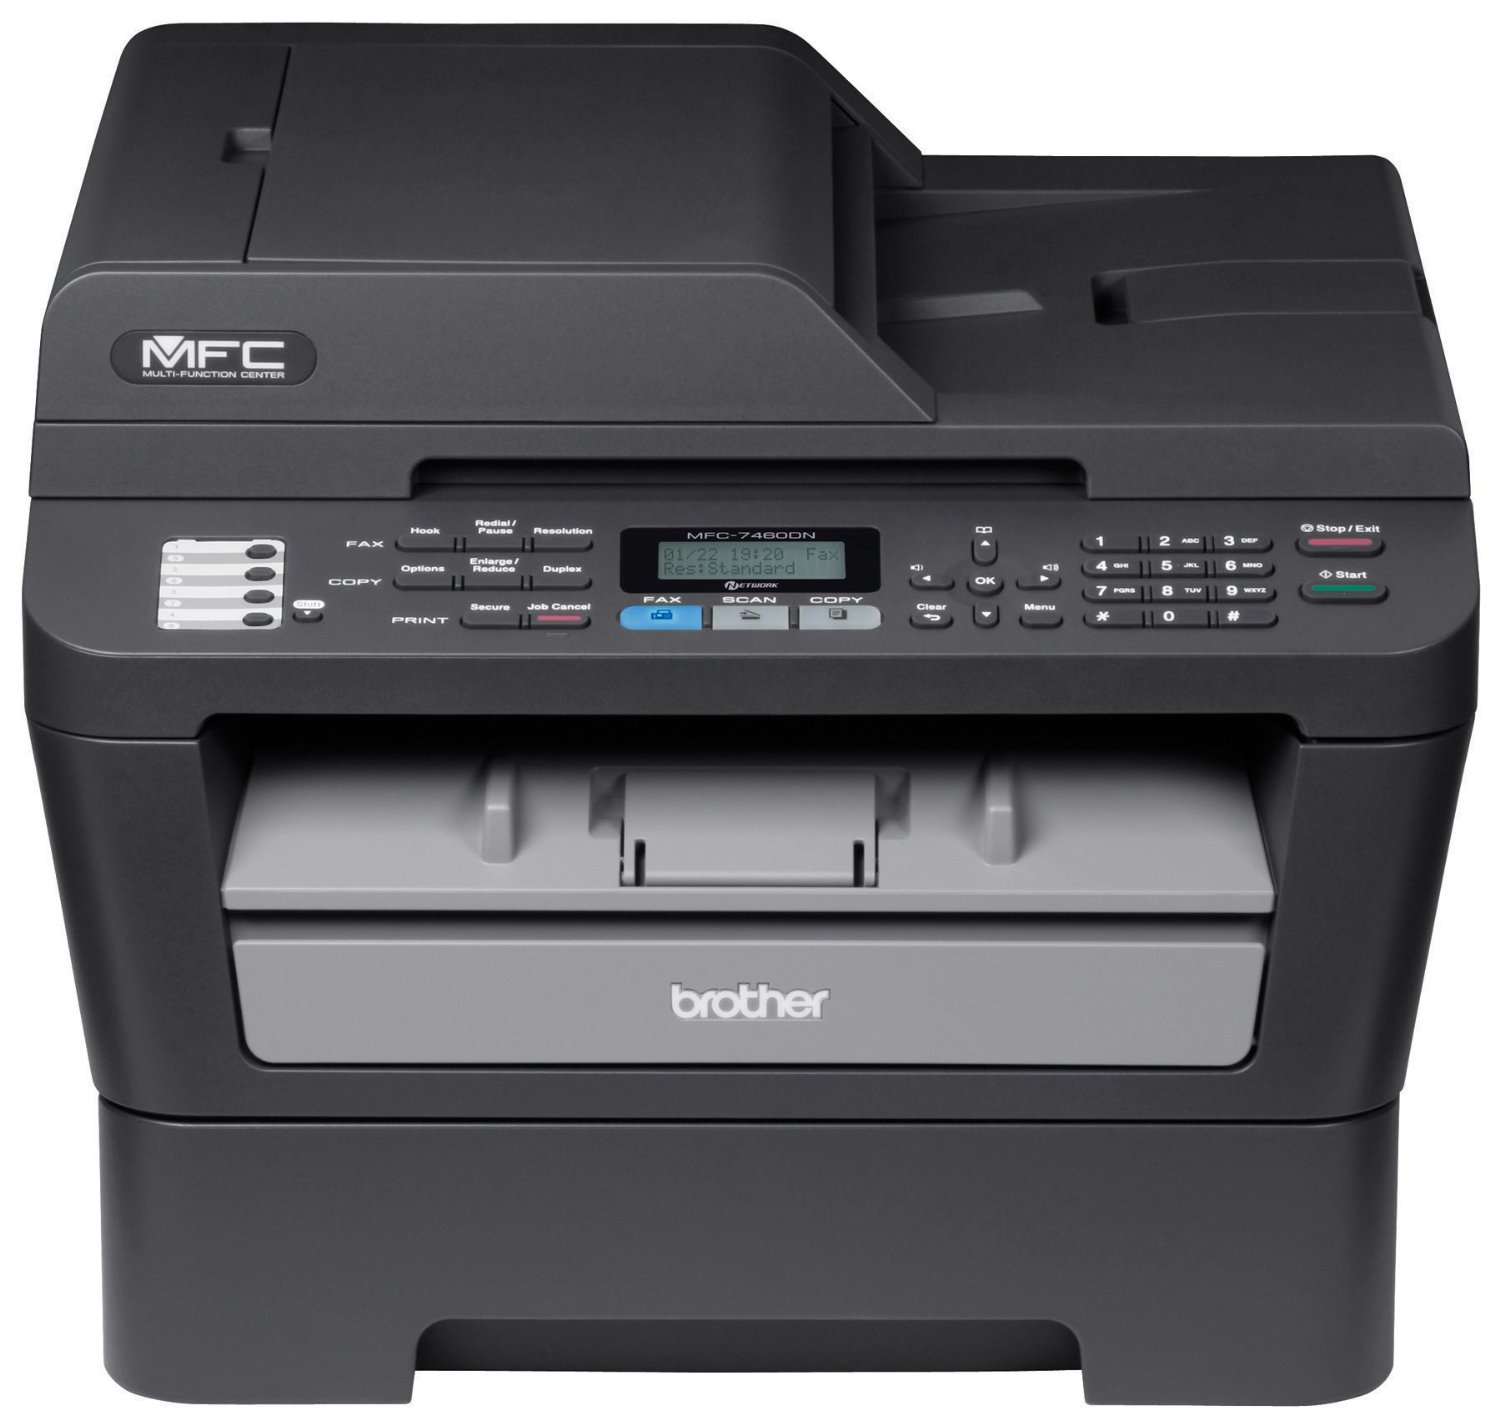 Brother mfc-7460dn driver